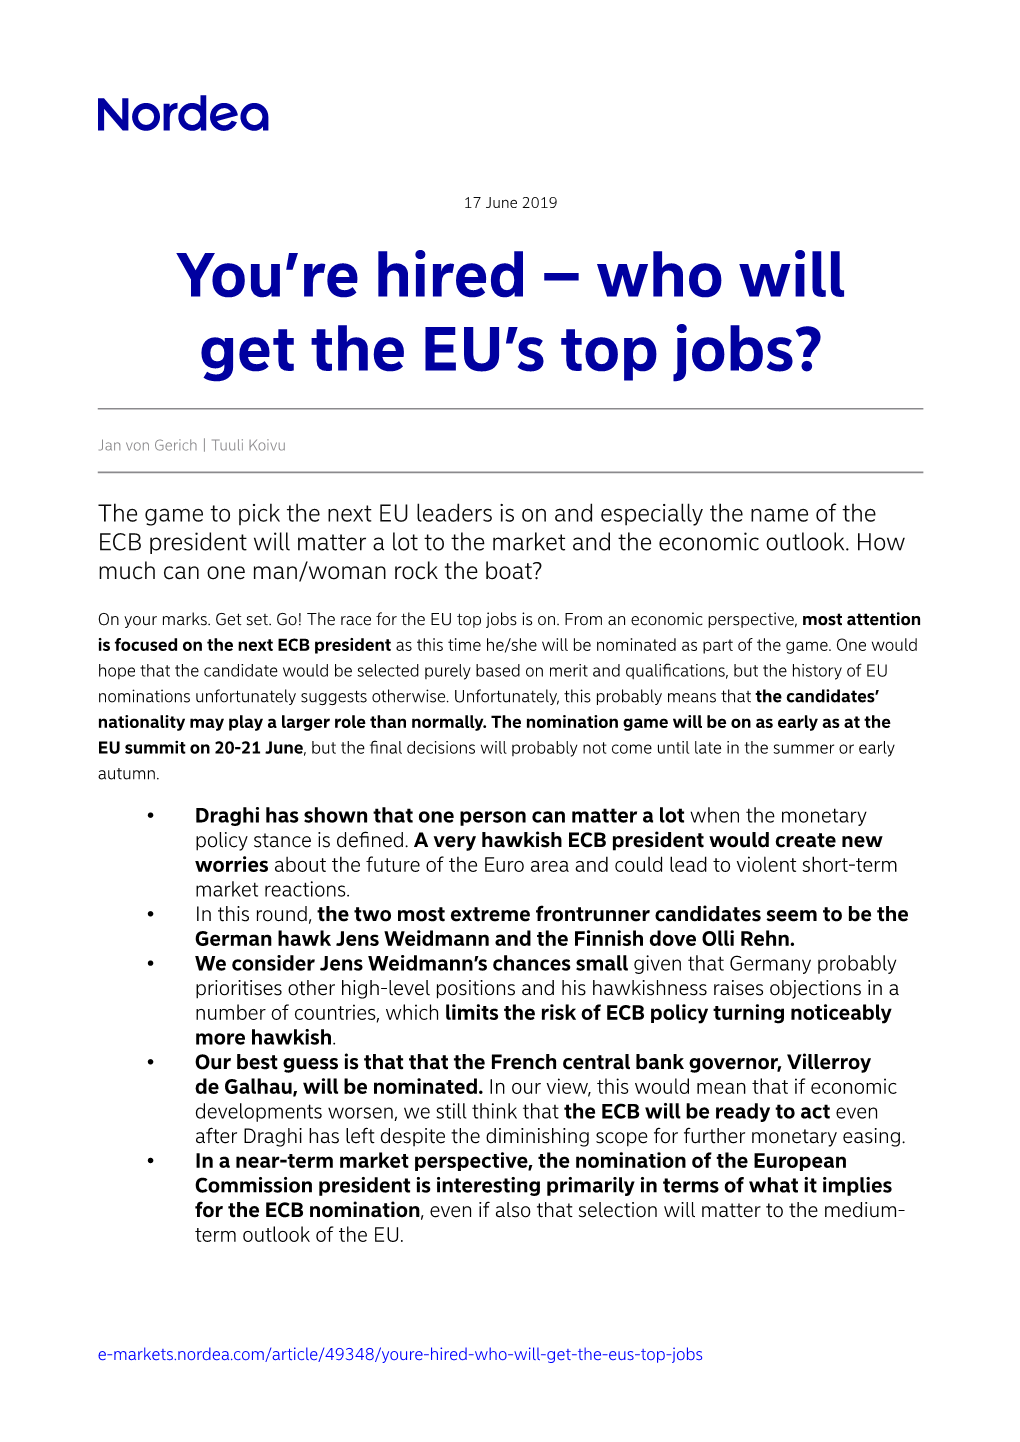 You're Hired – Who Will Get the EU's Top Jobs?